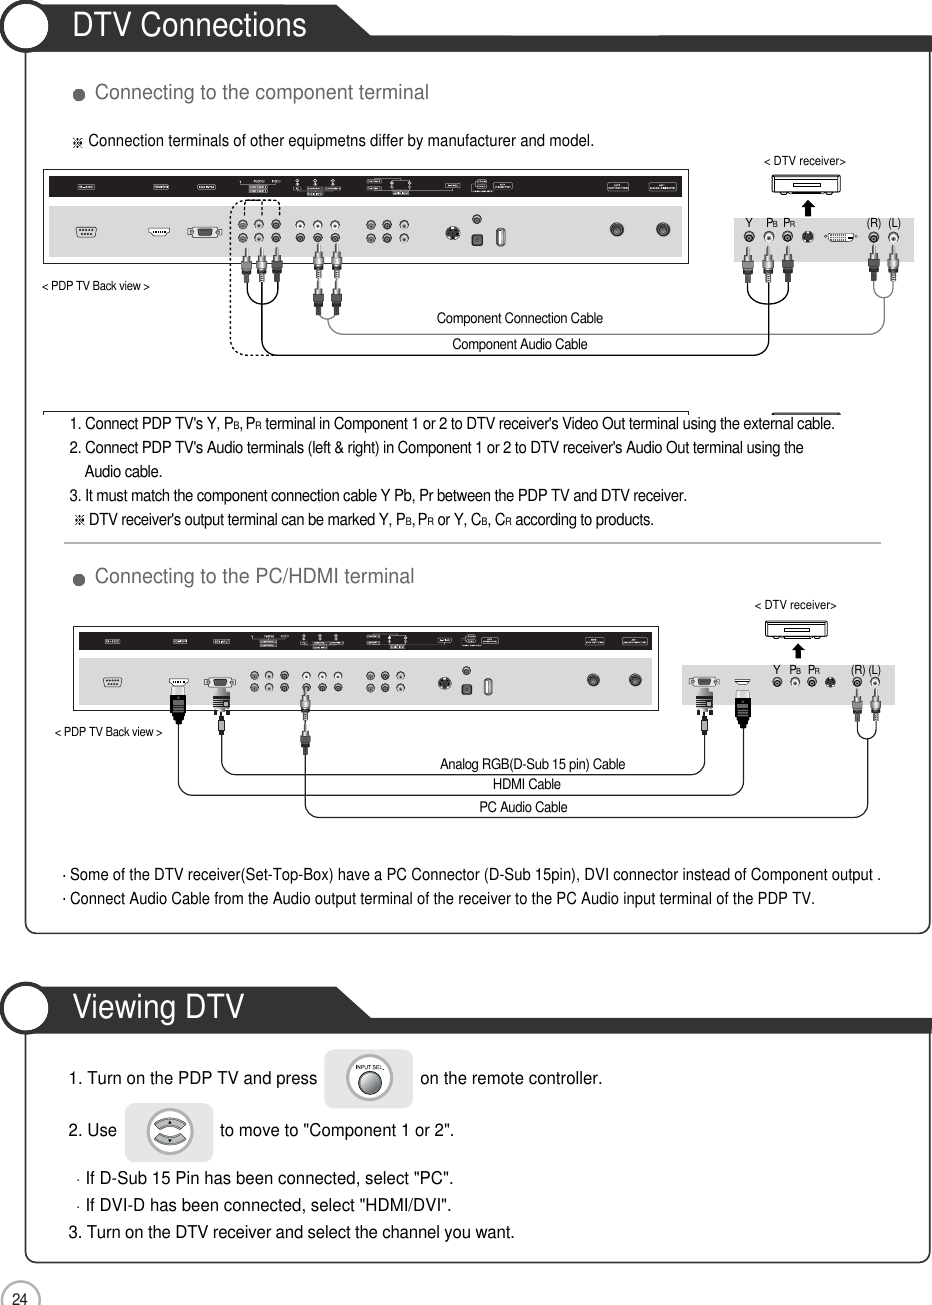 24DTV ConnectionsViewing DTVConnection1. Connect PDP TV&apos;s Y, PB,PRterminal in Component 1 or 2 to DTV receiver&apos;s Video Out terminal using the external cable.2. Connect PDP TV&apos;s Audio terminals (left &amp; right) in Component 1 or 2 to DTV receiver&apos;s Audio Out terminal using the Audio cable.3. It must match the component connection cable Y Pb, Pr between the PDP TV and DTV receiver.DTV receiver&apos;s output terminal can be marked Y, PB,PRor Y, CB, CRaccording to products.Some of the DTV receiver(Set-Top-Box) have a PC Connector (D-Sub 15pin), DVI connector instead of Component output .Connect Audio Cable from the Audio output terminal of the receiver to the PC Audio input terminal of the PDP TV.1. Turn on the PDP TV and press                      on the remote controller.2. Use                      to move to &quot;Component 1 or 2&quot;.If D-Sub 15 Pin has been connected, select &quot;PC&quot;.If DVI-D has been connected, select &quot;HDMI/DVI&quot;.3. Turn on the DTV receiver and select the channel you want.Connecting to the component terminalConnecting to the PC/HDMI terminalConnection terminals of other equipmetns differ by manufacturer and model.(R) (L)PRPBY&lt; DTV receiver&gt;(R) (L)PRPBY&lt; DTV receiver&gt;Component Audio CableAnalog RGB(D-Sub 15 pin) CablePC Audio Cable&lt; PDP TV Back view &gt;&lt; PDP TV Back view &gt;HDMI CableComponent Connection Cable